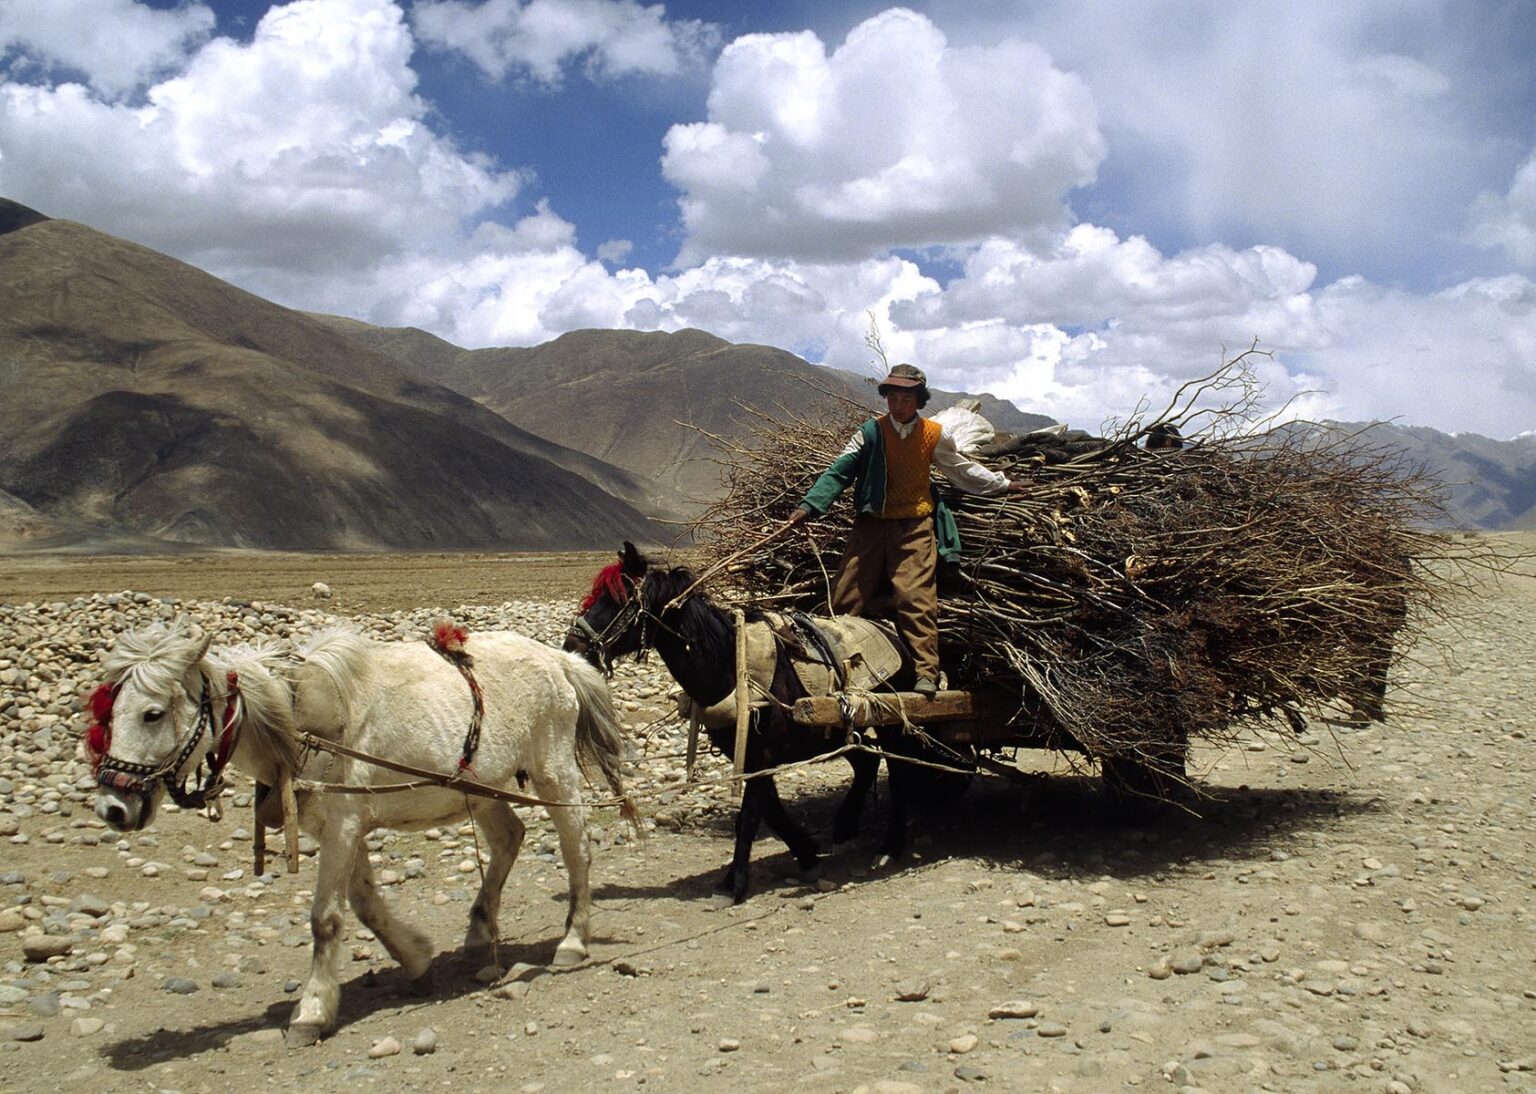 A HORSE DRAWN CART loaded with FIREWOOD in the KYICHU RIVER VALLEY - CENTRAL TIBET